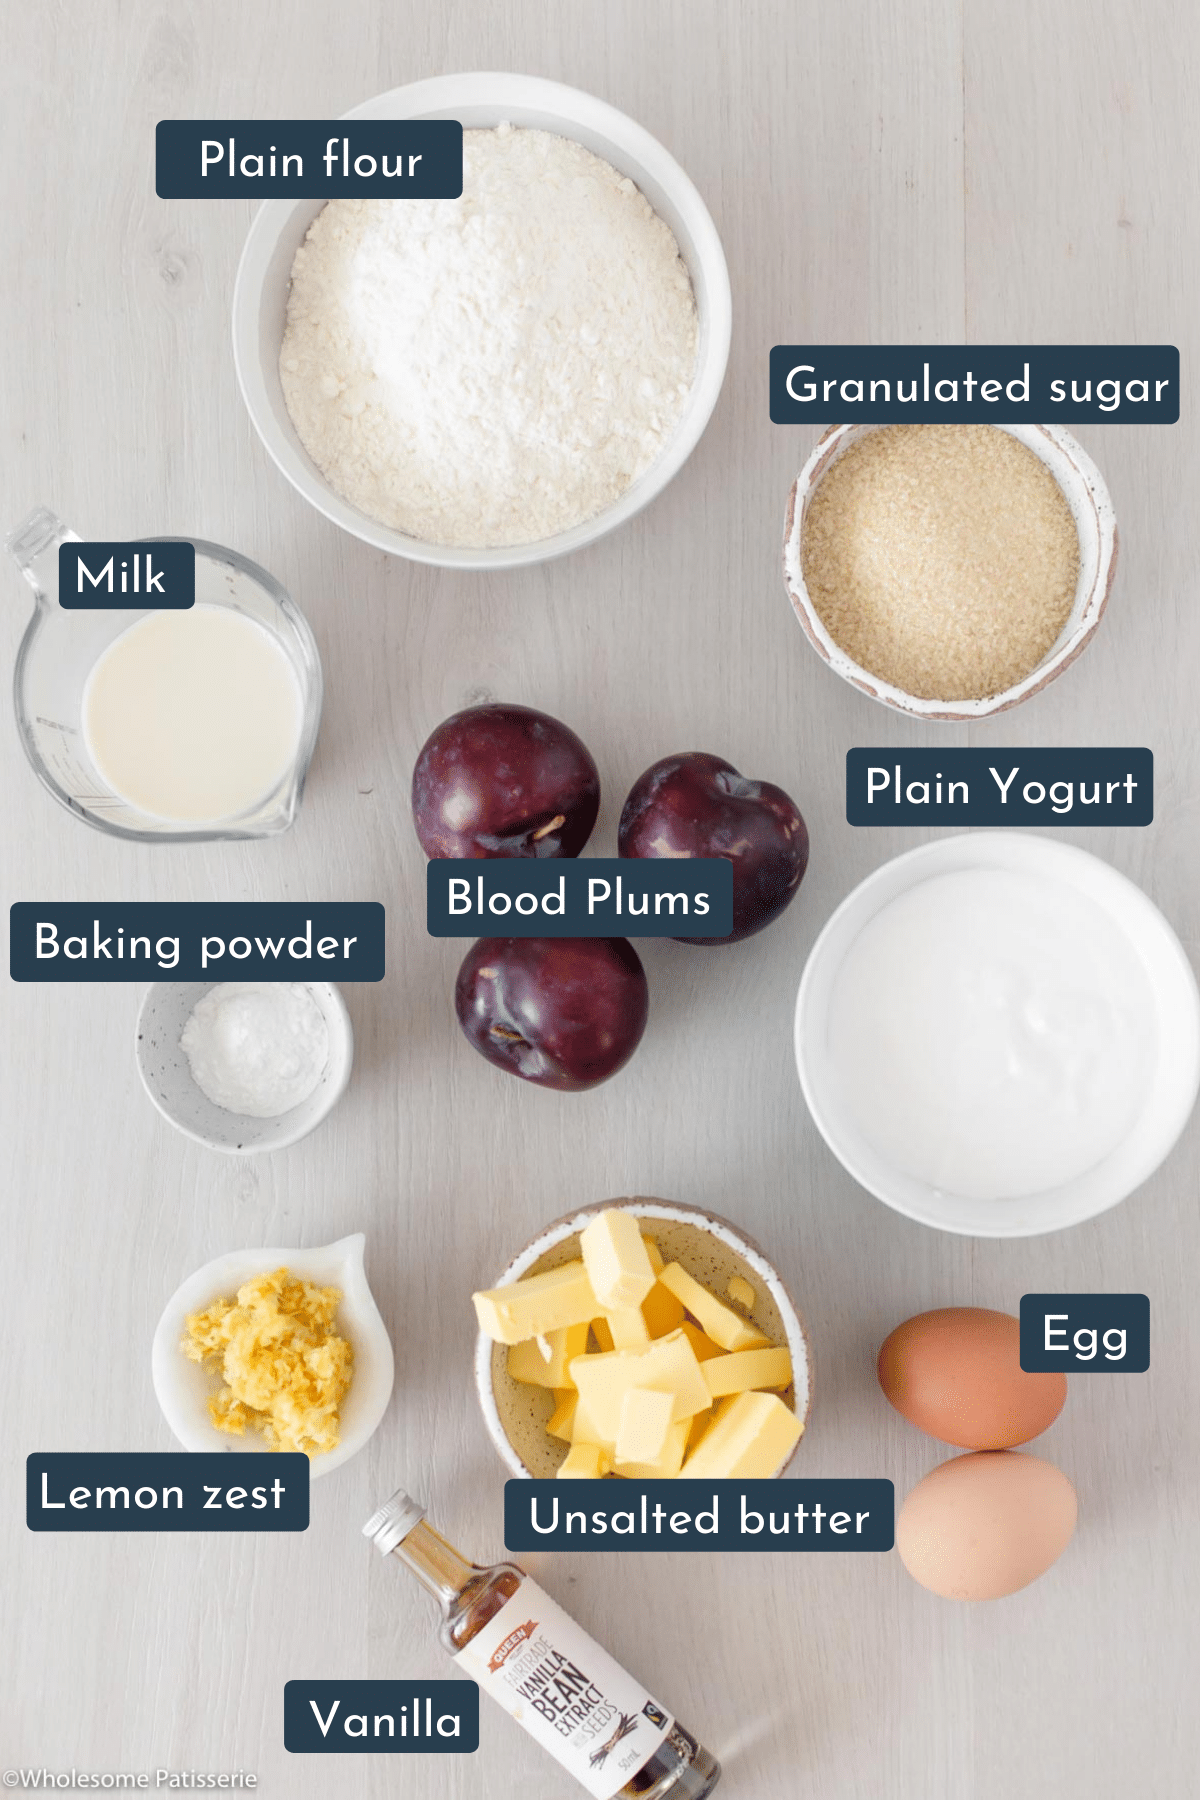 Showing each individual ingredient needed to bake this cake